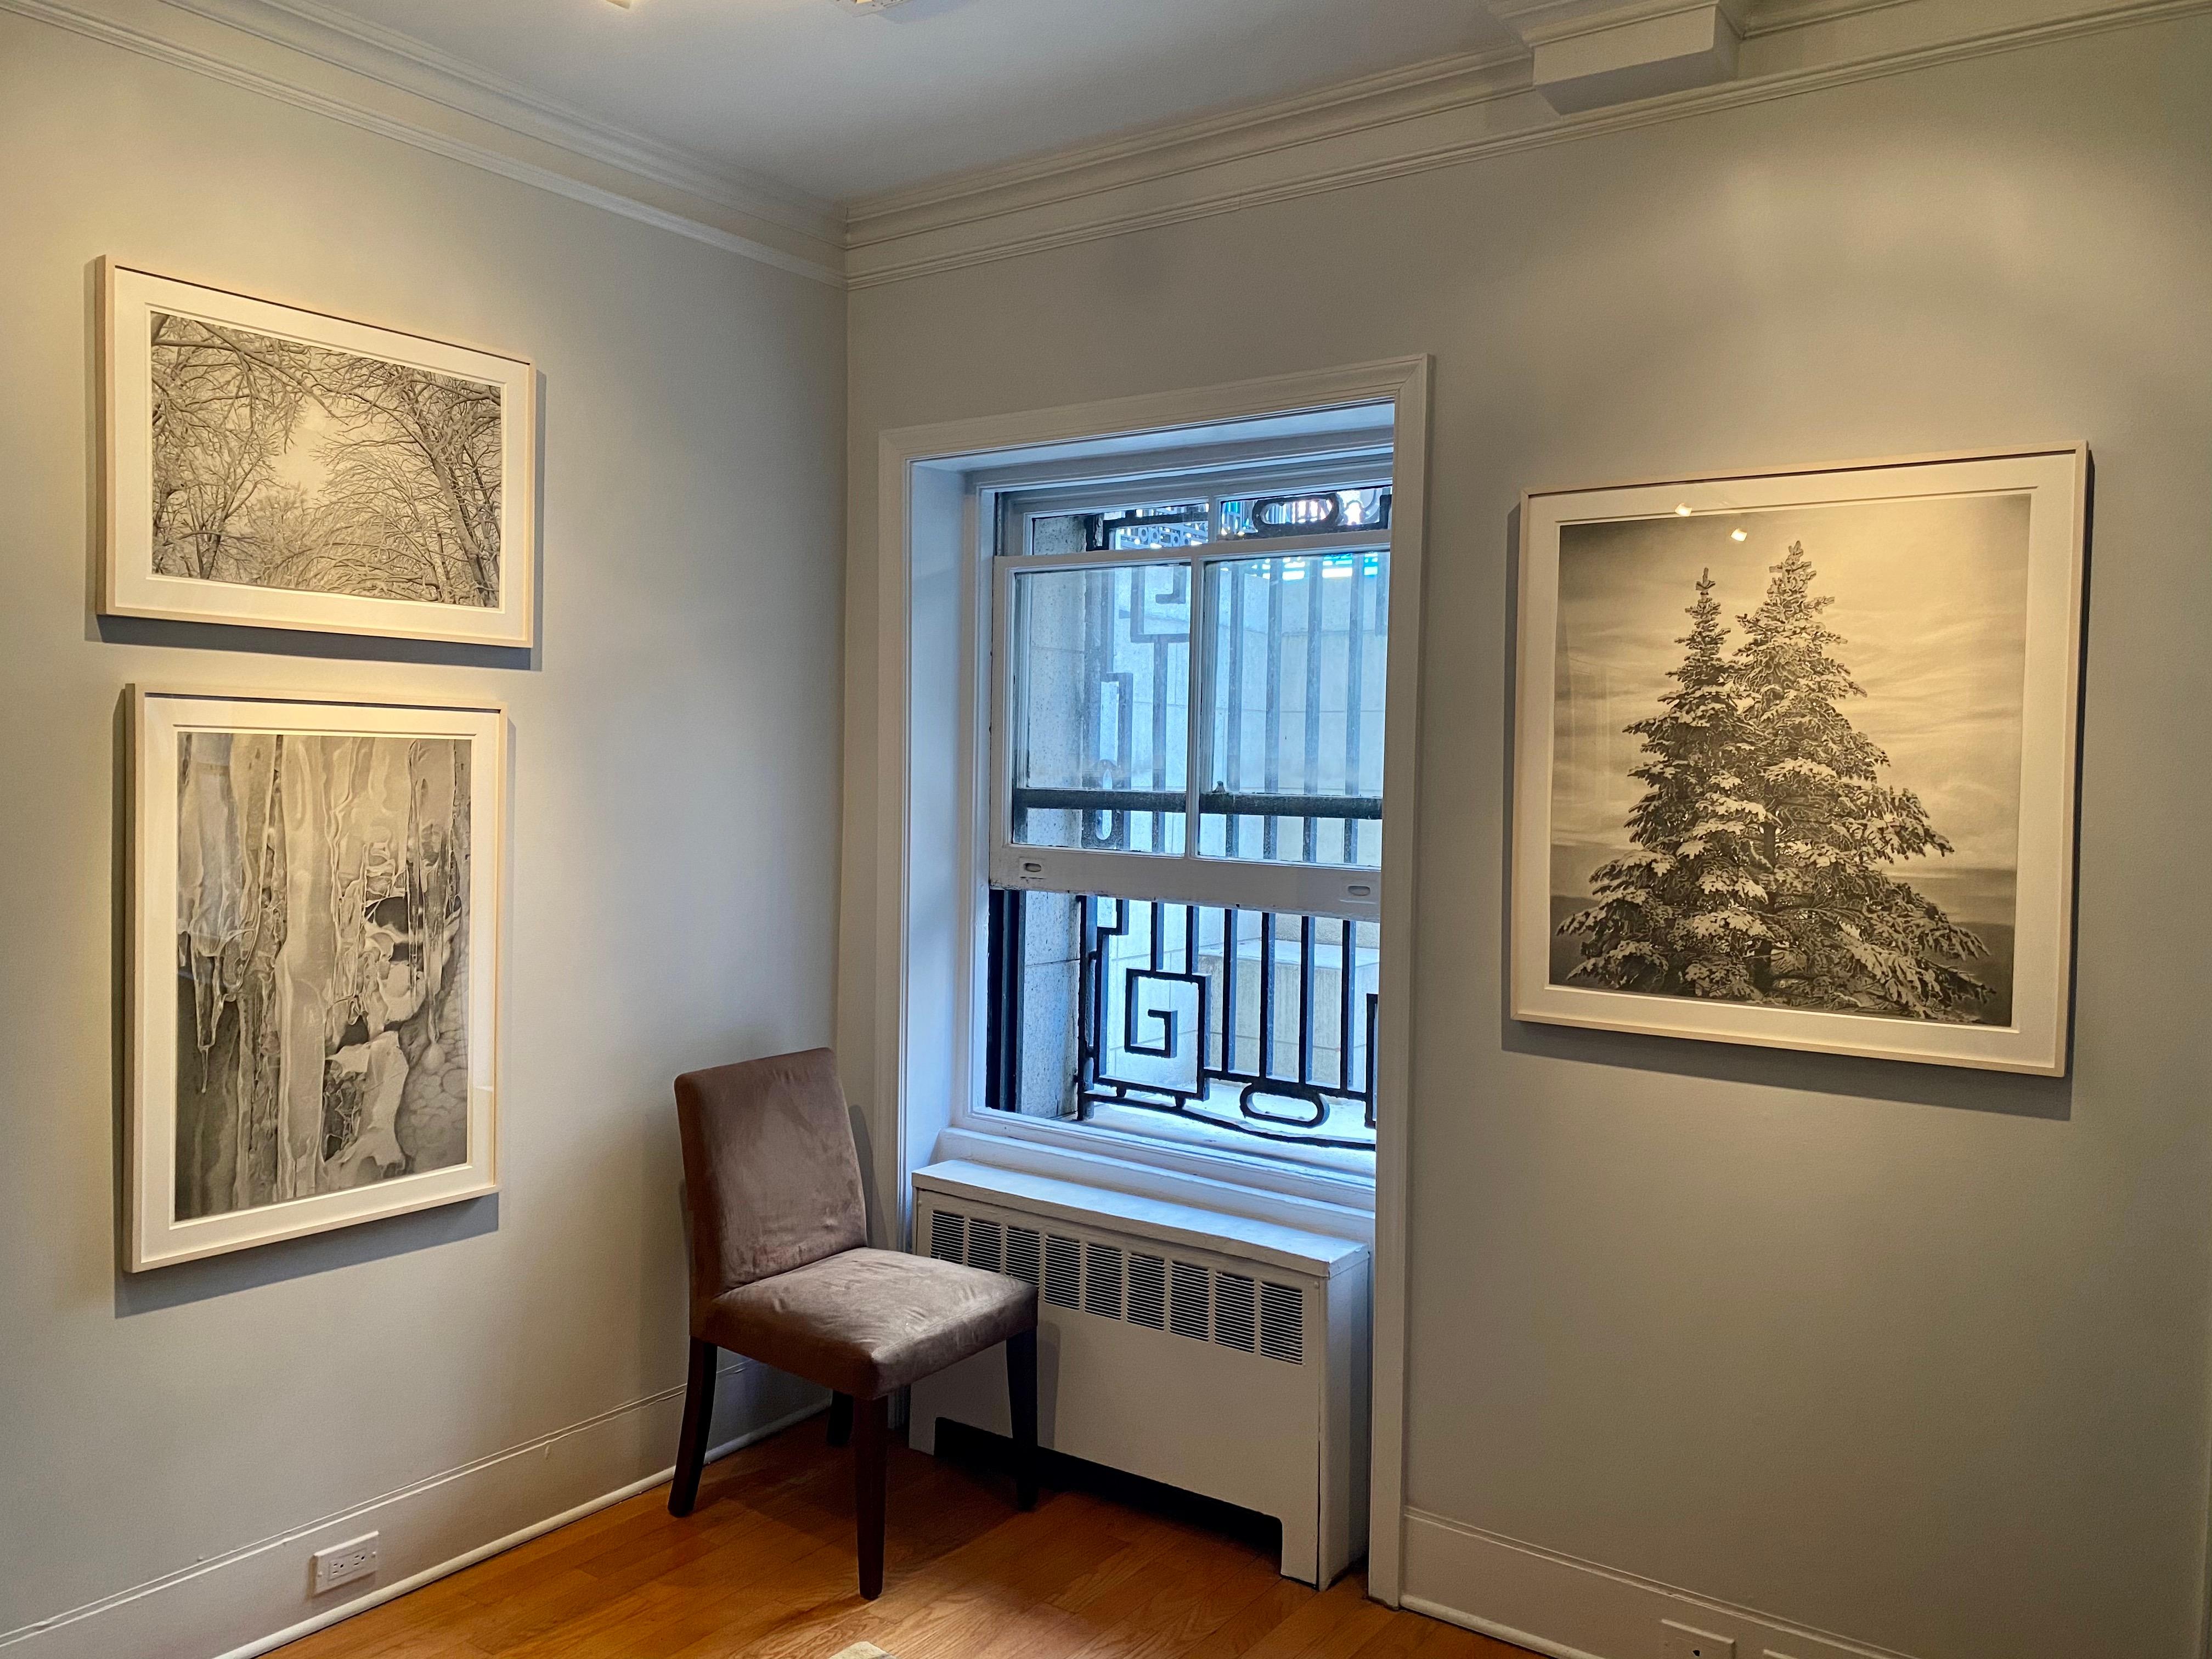 Wintry Trees 3, photorealist graphite landscape drawing, 2021 - Photorealist Art by Mary Reilly